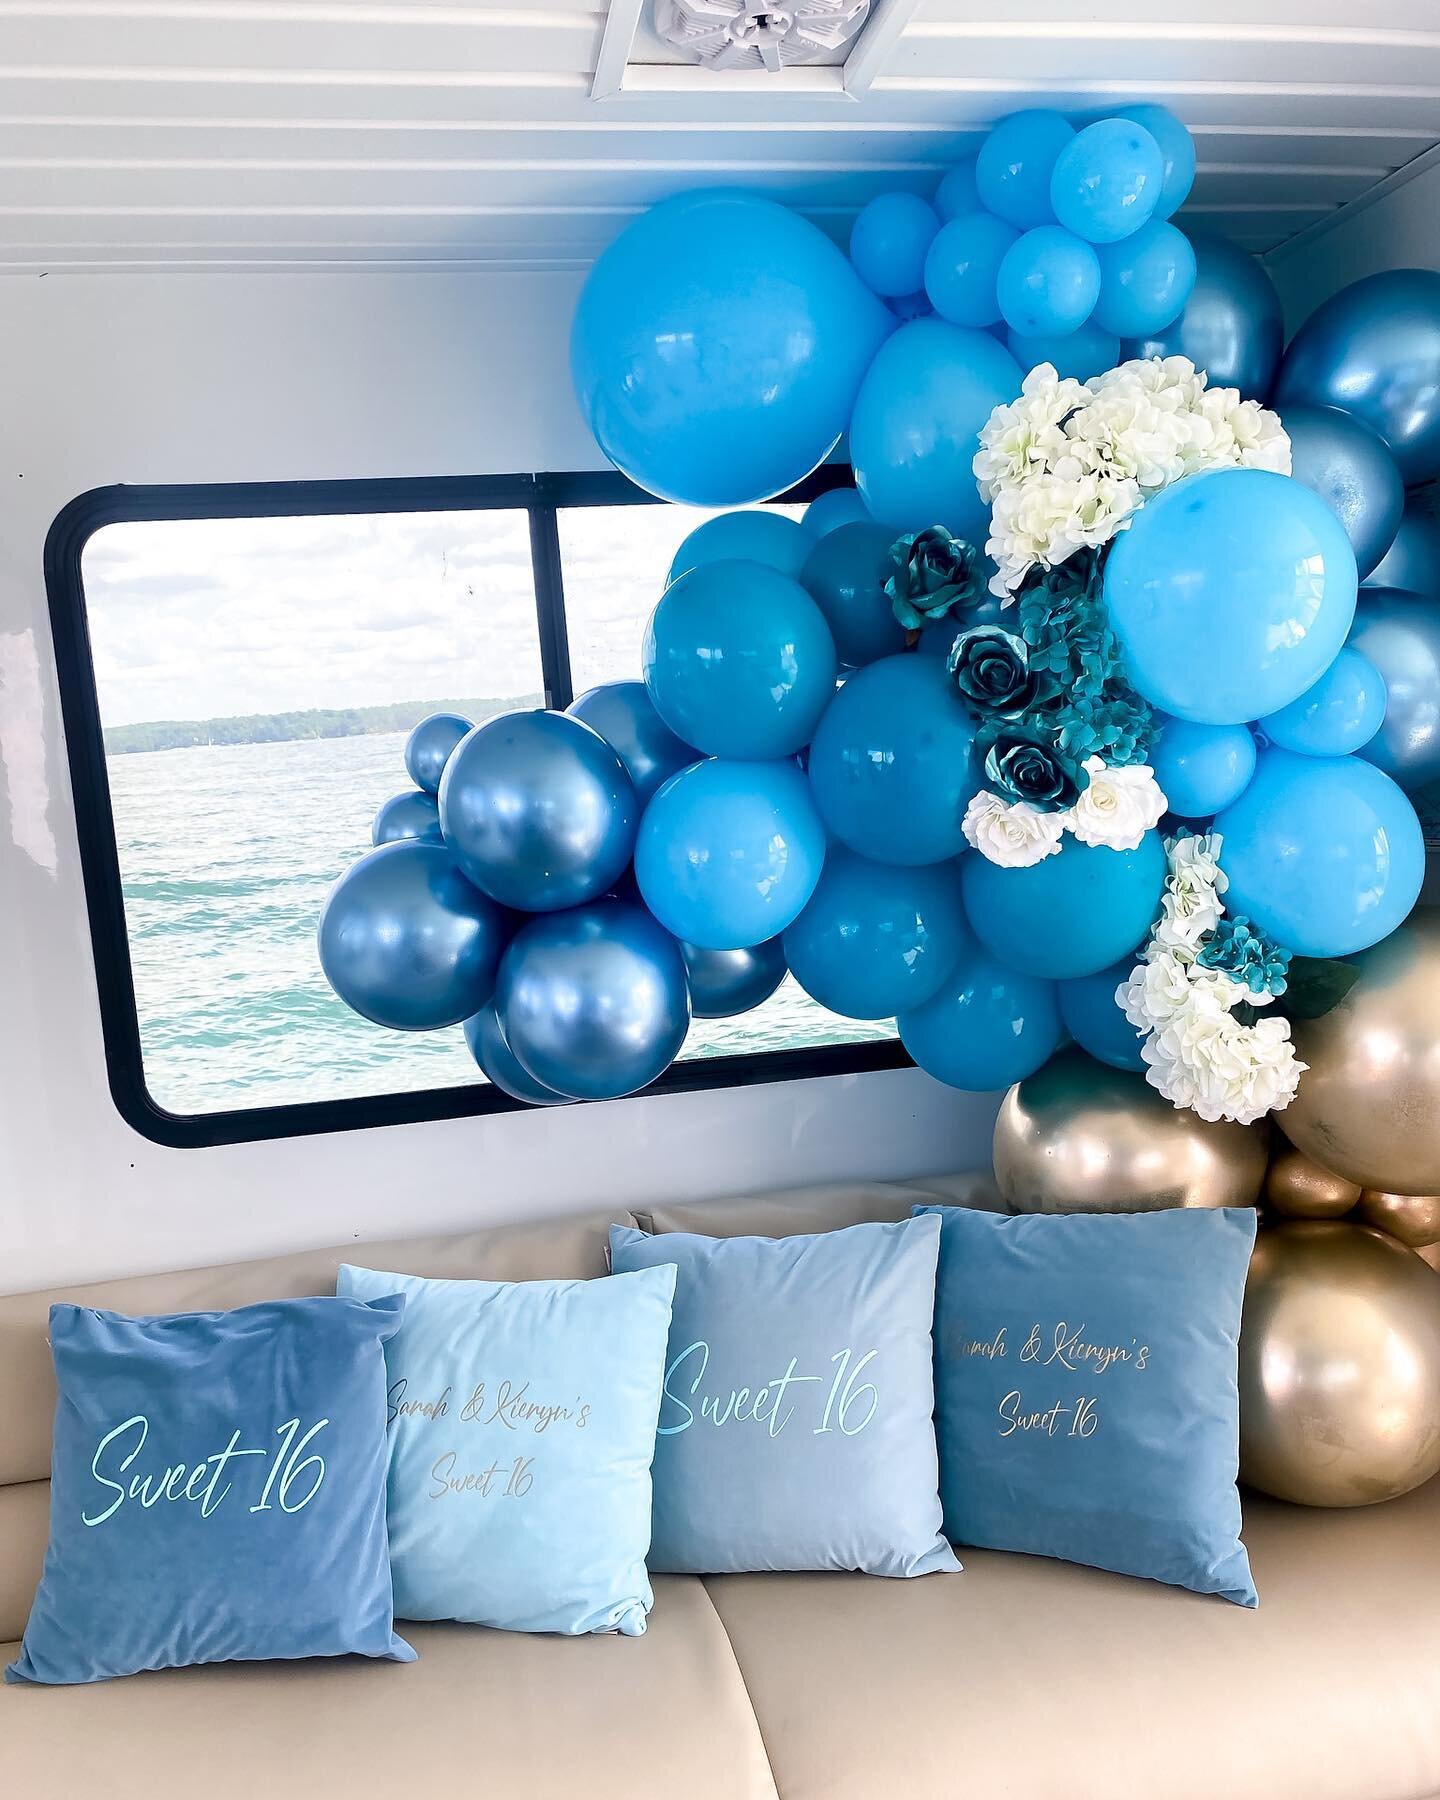 Endless blues 🌊 Sweet 16 Boat Party. 

Ask Her to meet you anywhere, and we&rsquo;re there! 
.
.
.
#atlanta #sweet16party #atleventplanner #atlantaeventplanner #atlballoons #luxurypicnic #atlantaeventstylist #atl #atlanta